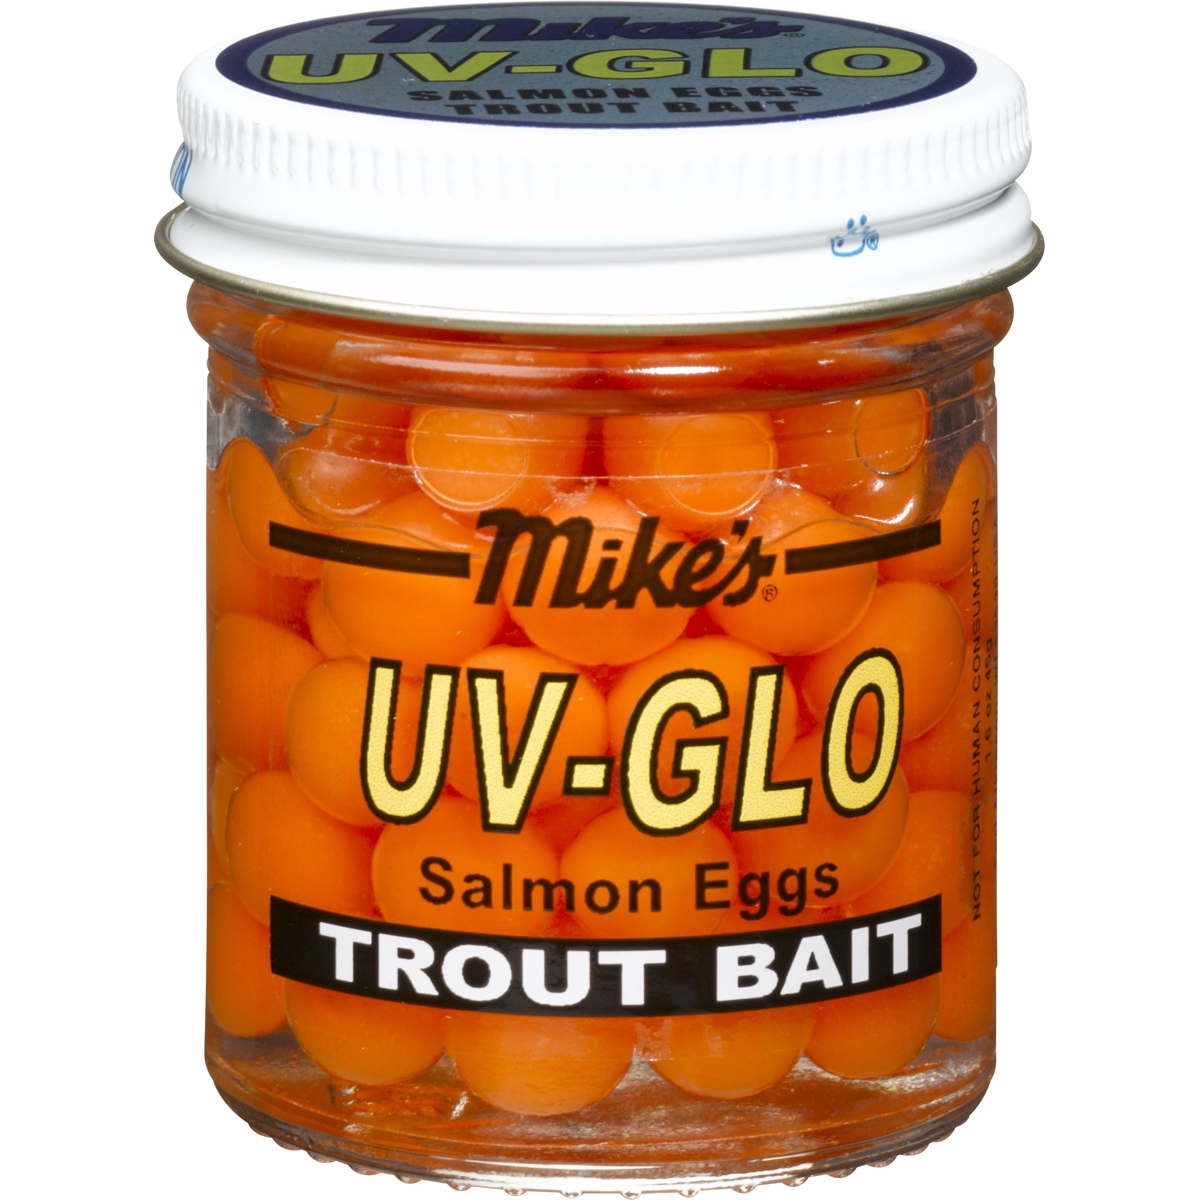 Photo of Atlas-Mike's UV Glo Eggs for sale at United Tackle Shops.